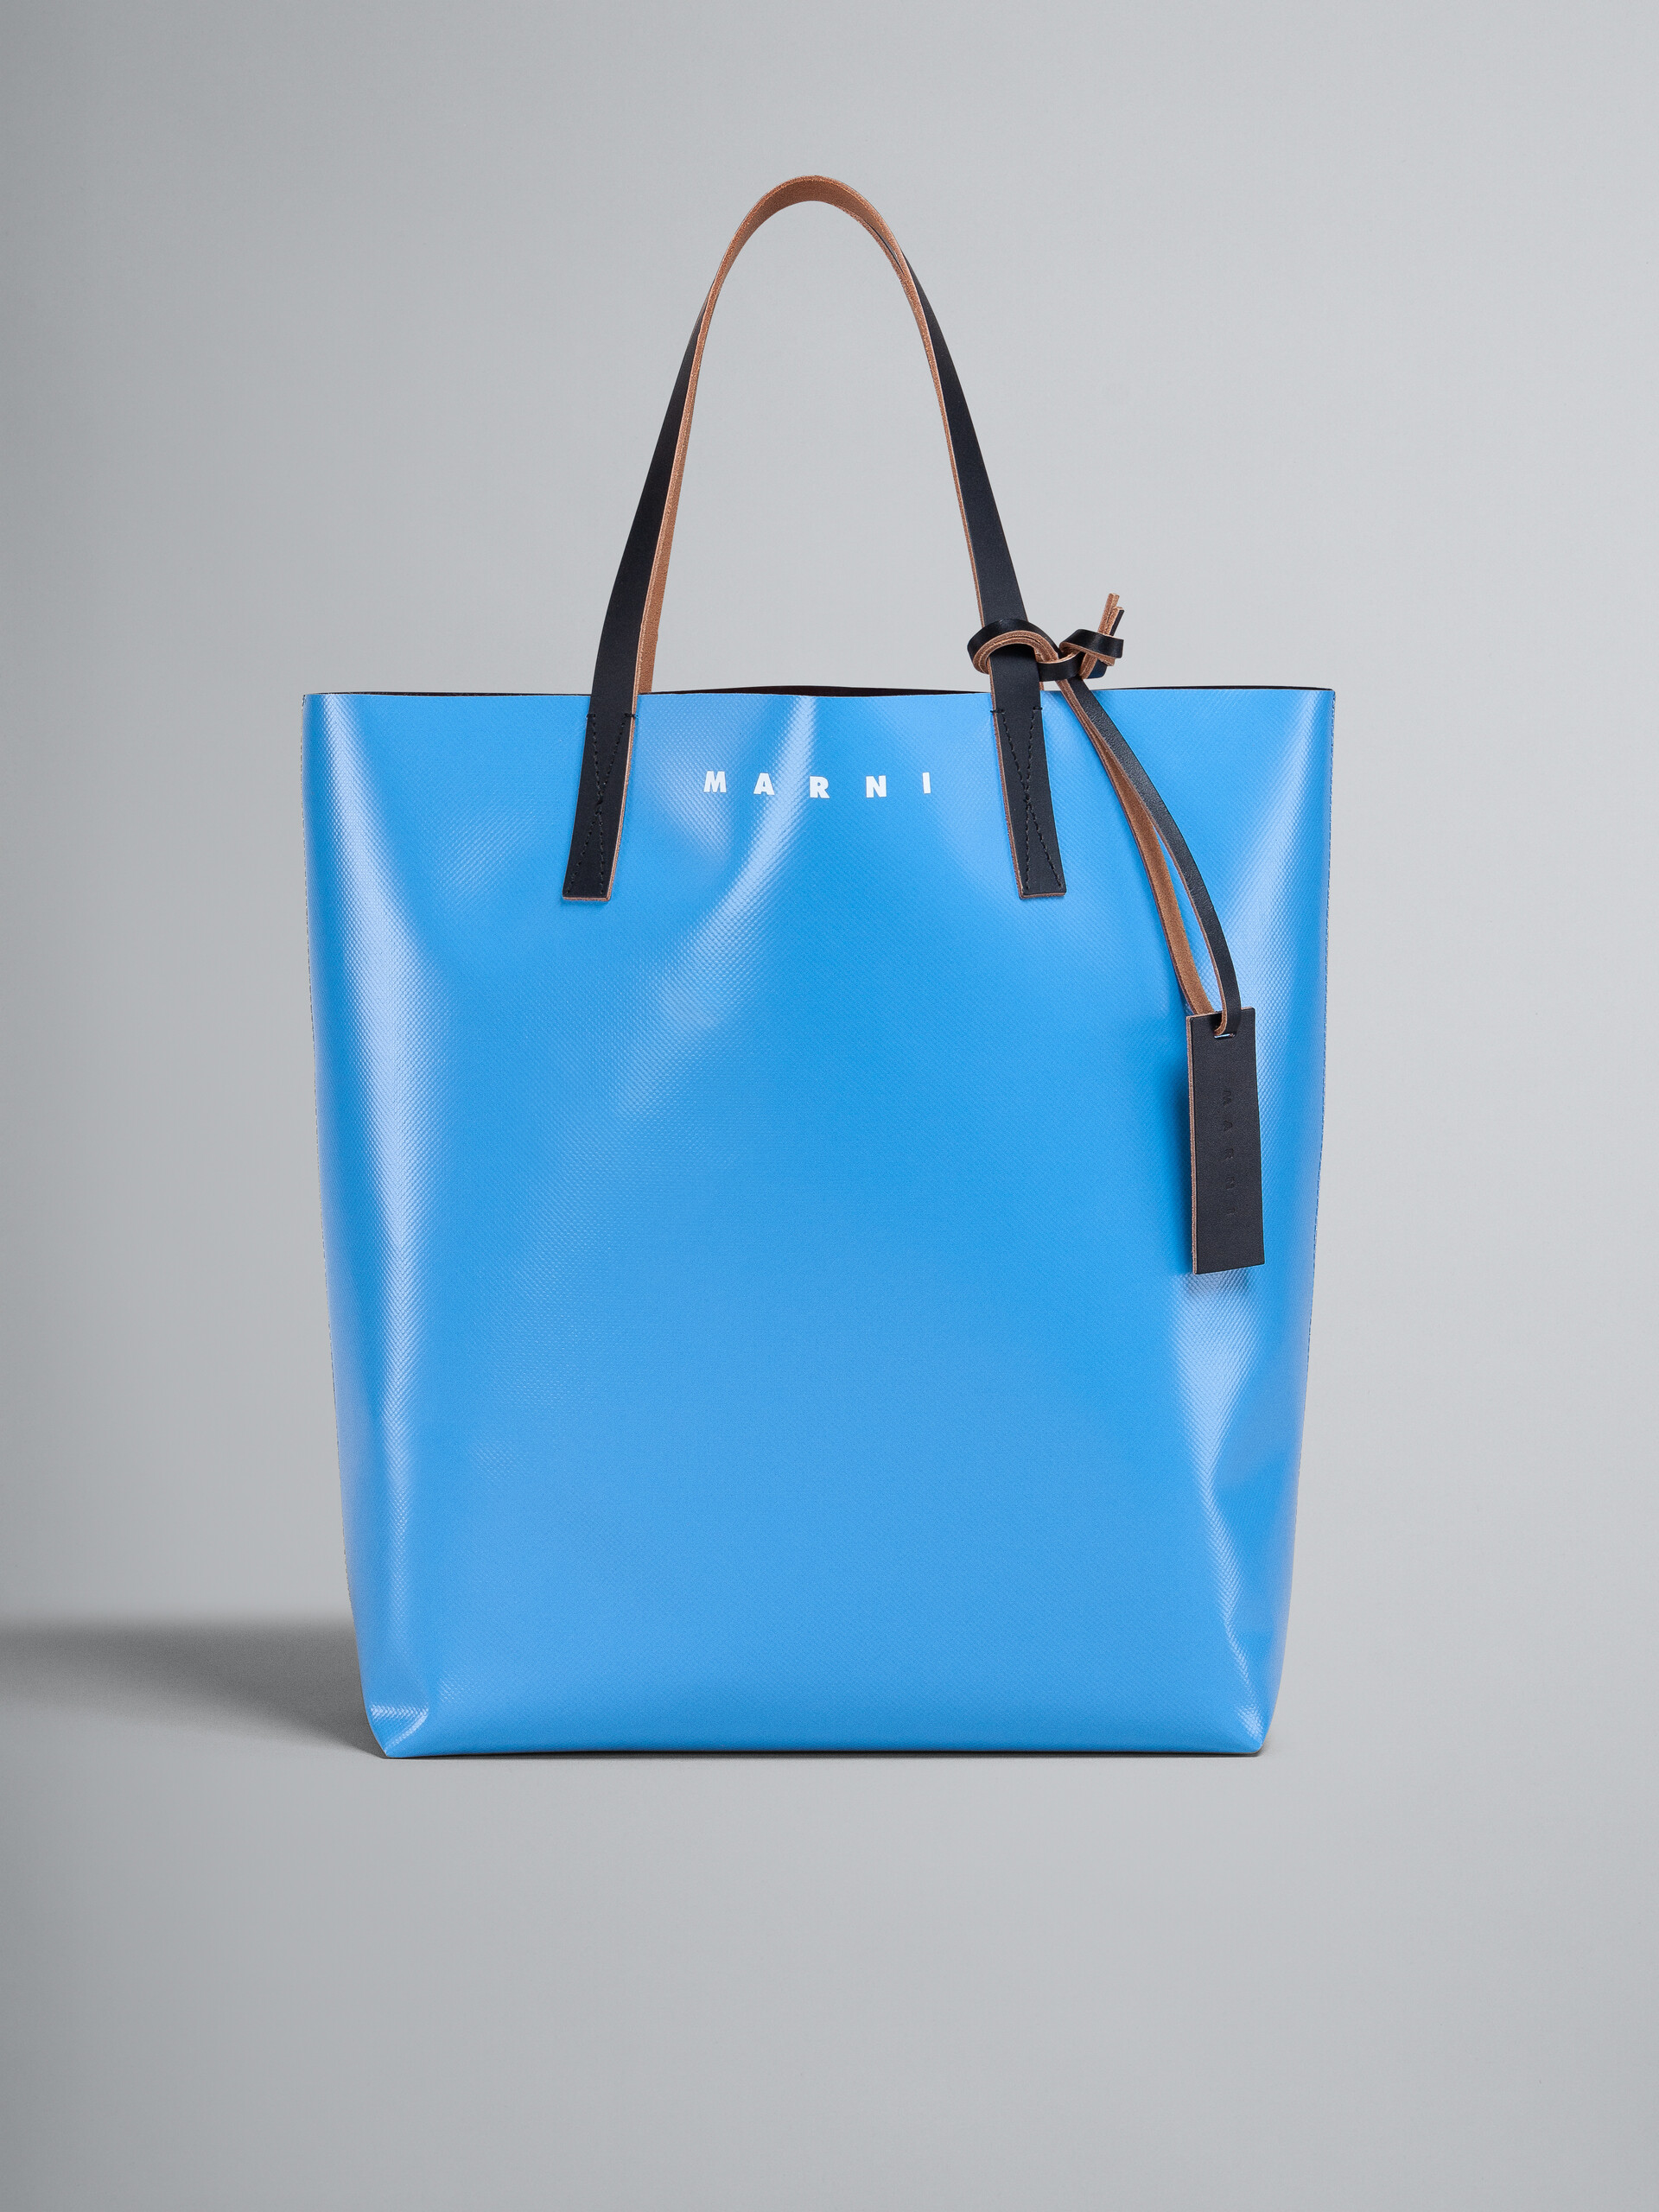 Brown and blue TRIBECA shopping bag - Shopping Bags - Image 1